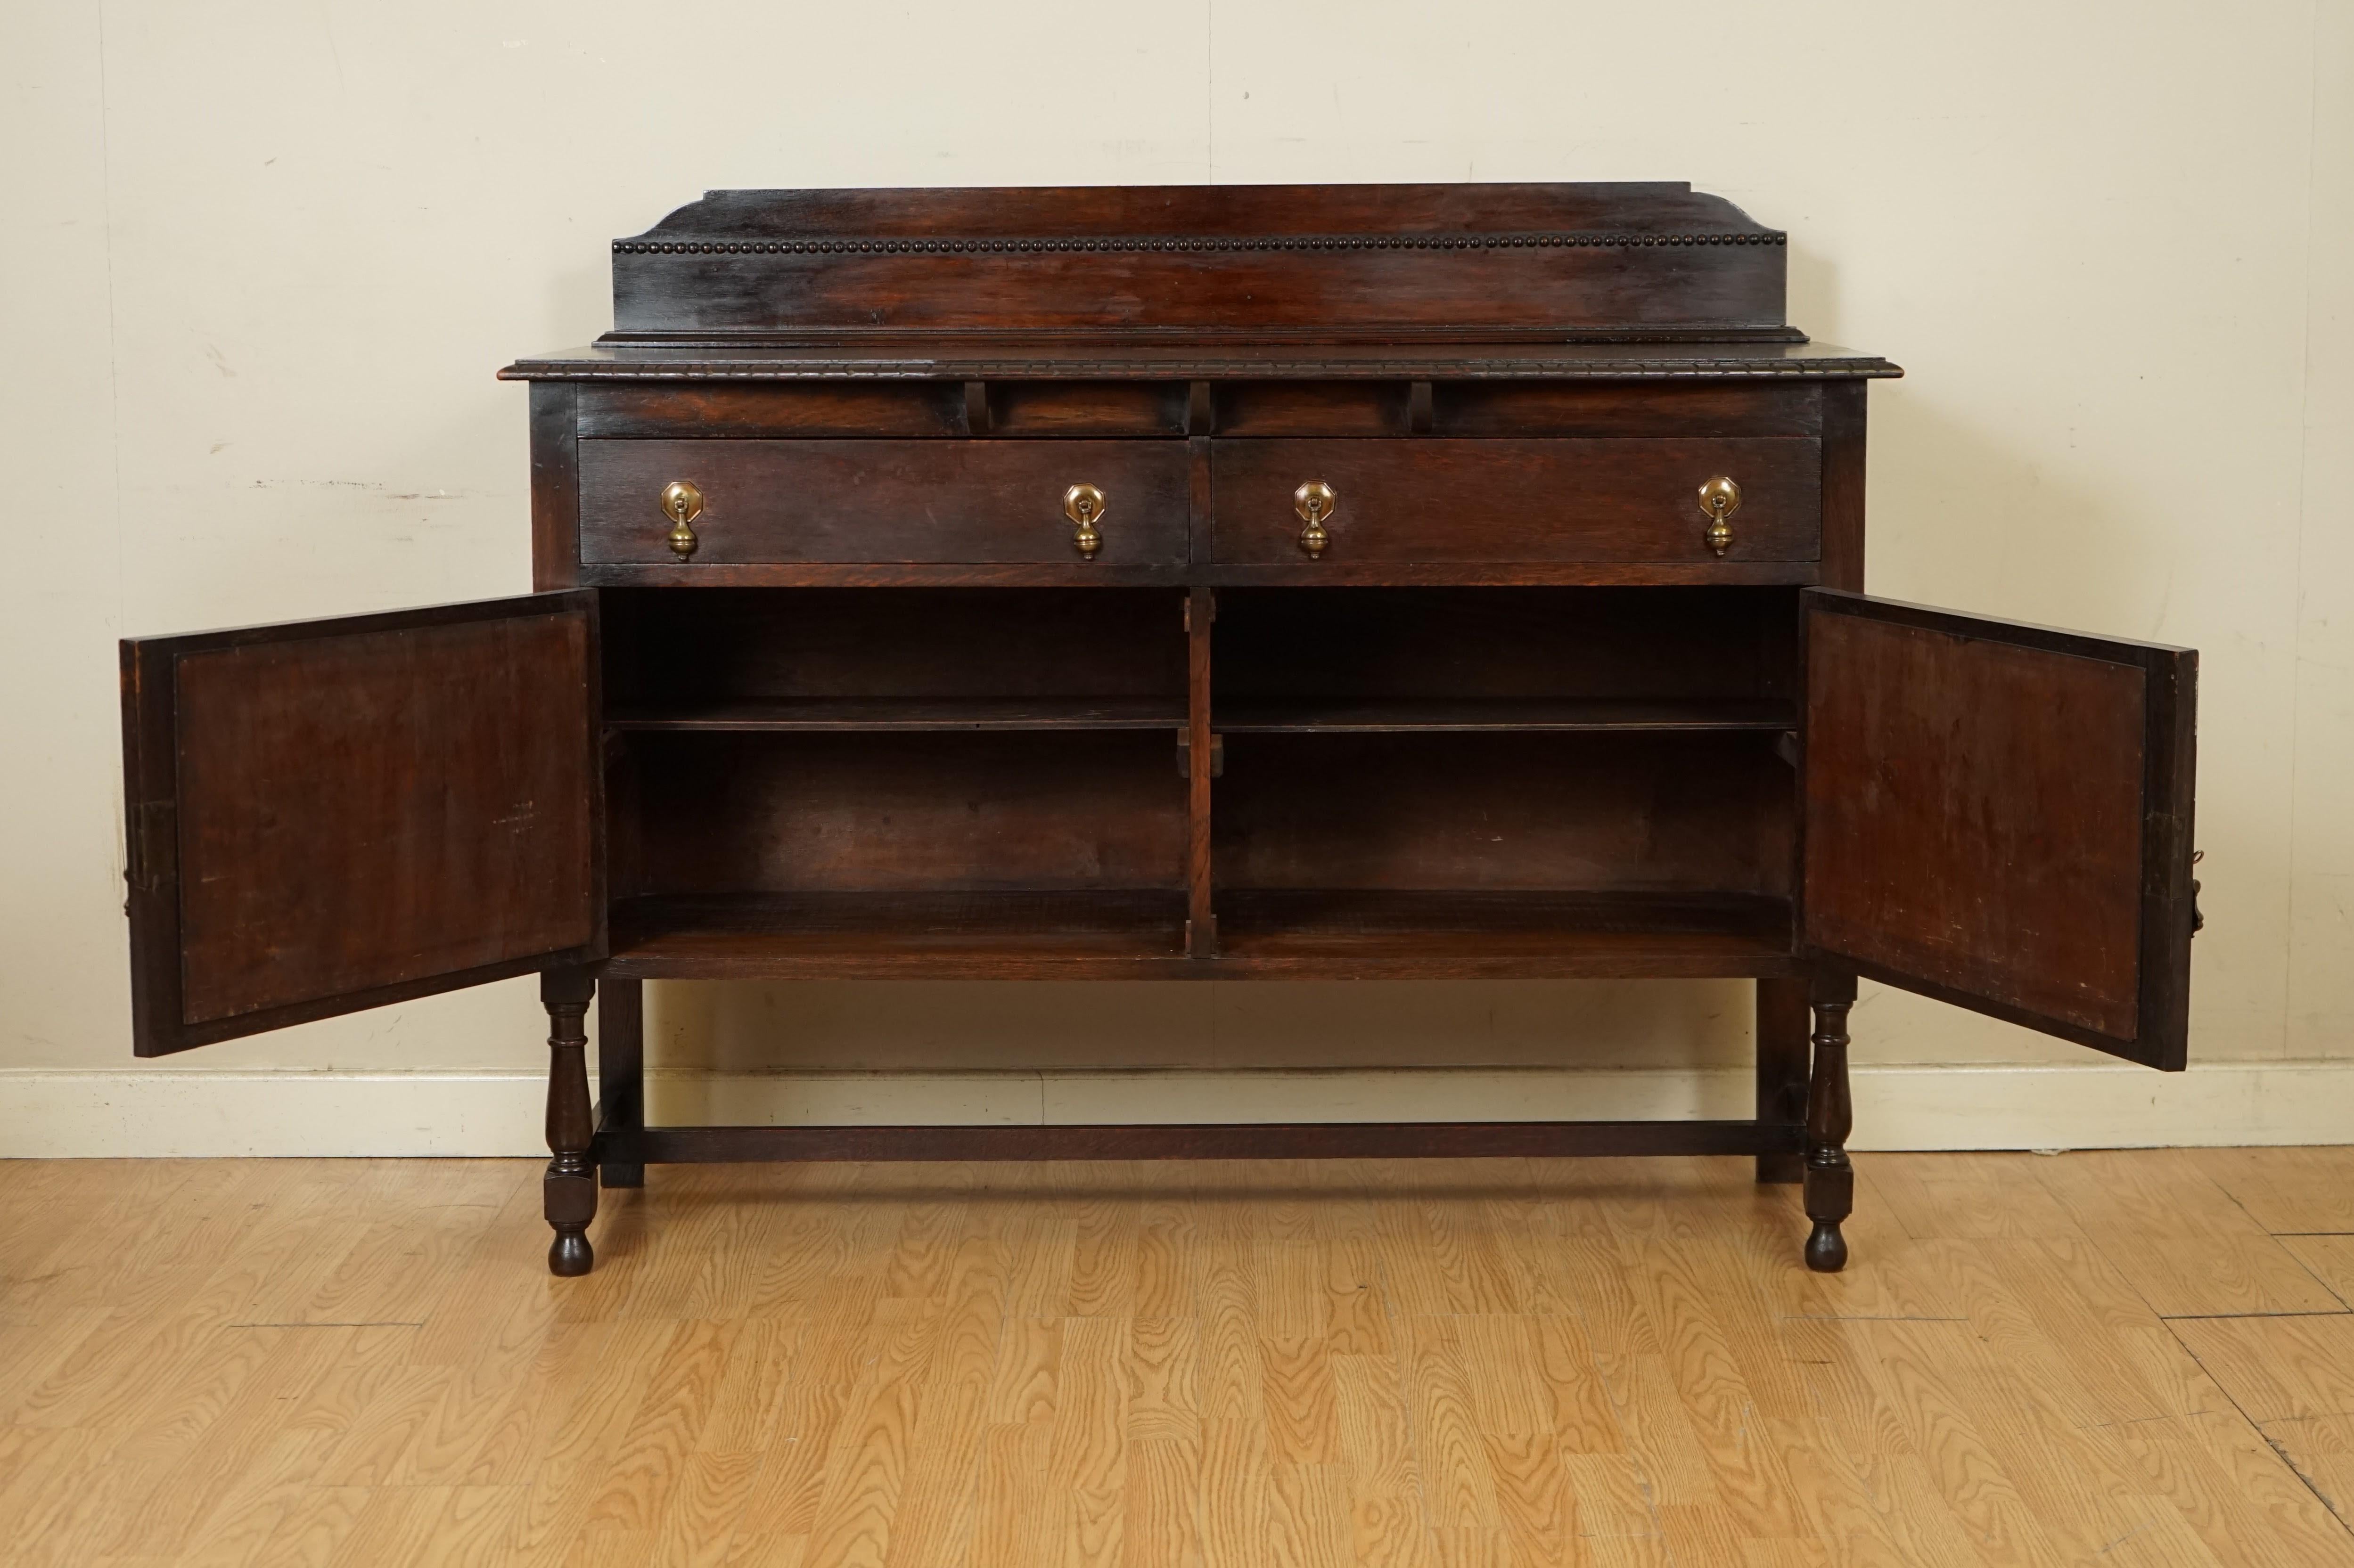 20th Century Lovely Antique Oak Victorian Sideboard with Drawers and Doors